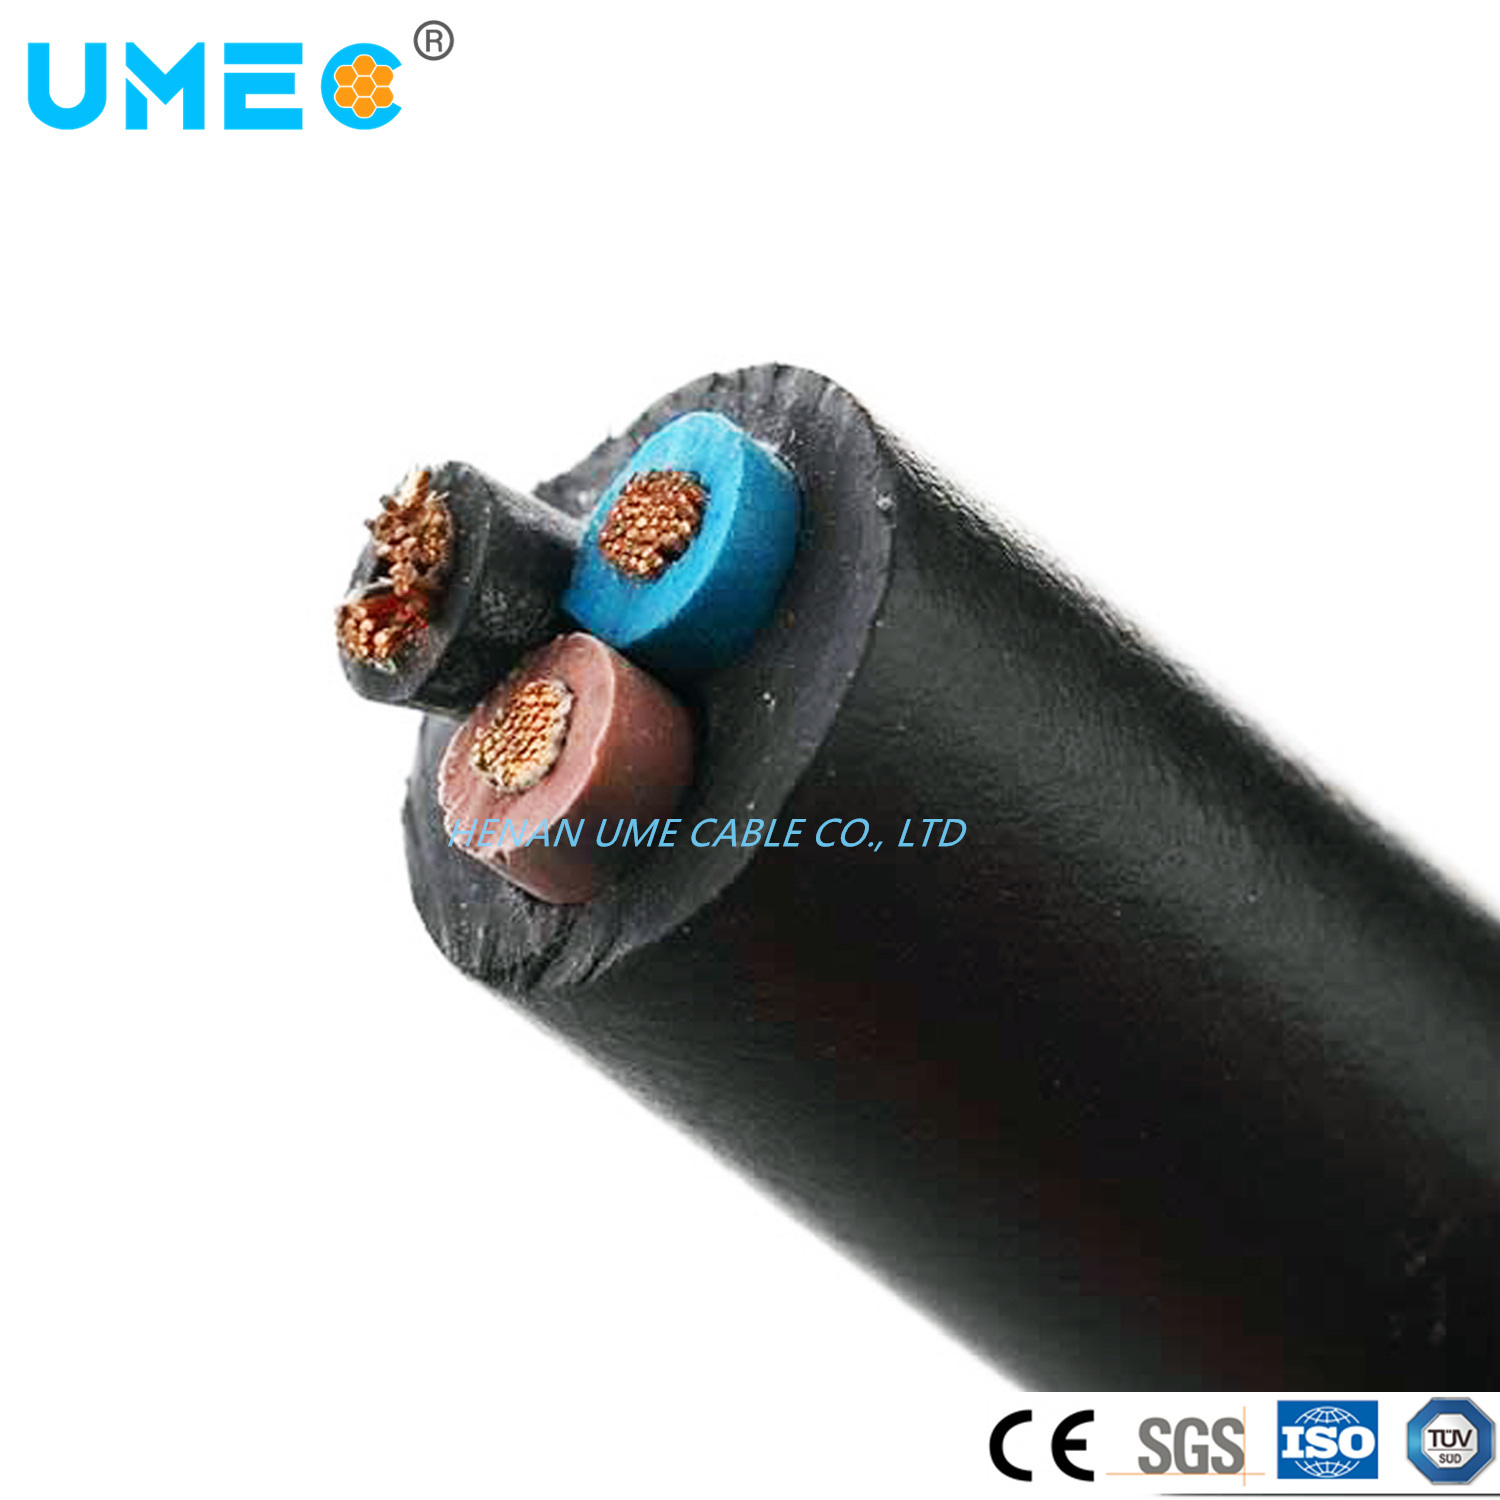 European Rubber CPE/Epr/EPDM Flexible Copper Cable H07bb (RN) -F H05bb (RN) -F Electric Cable Wire